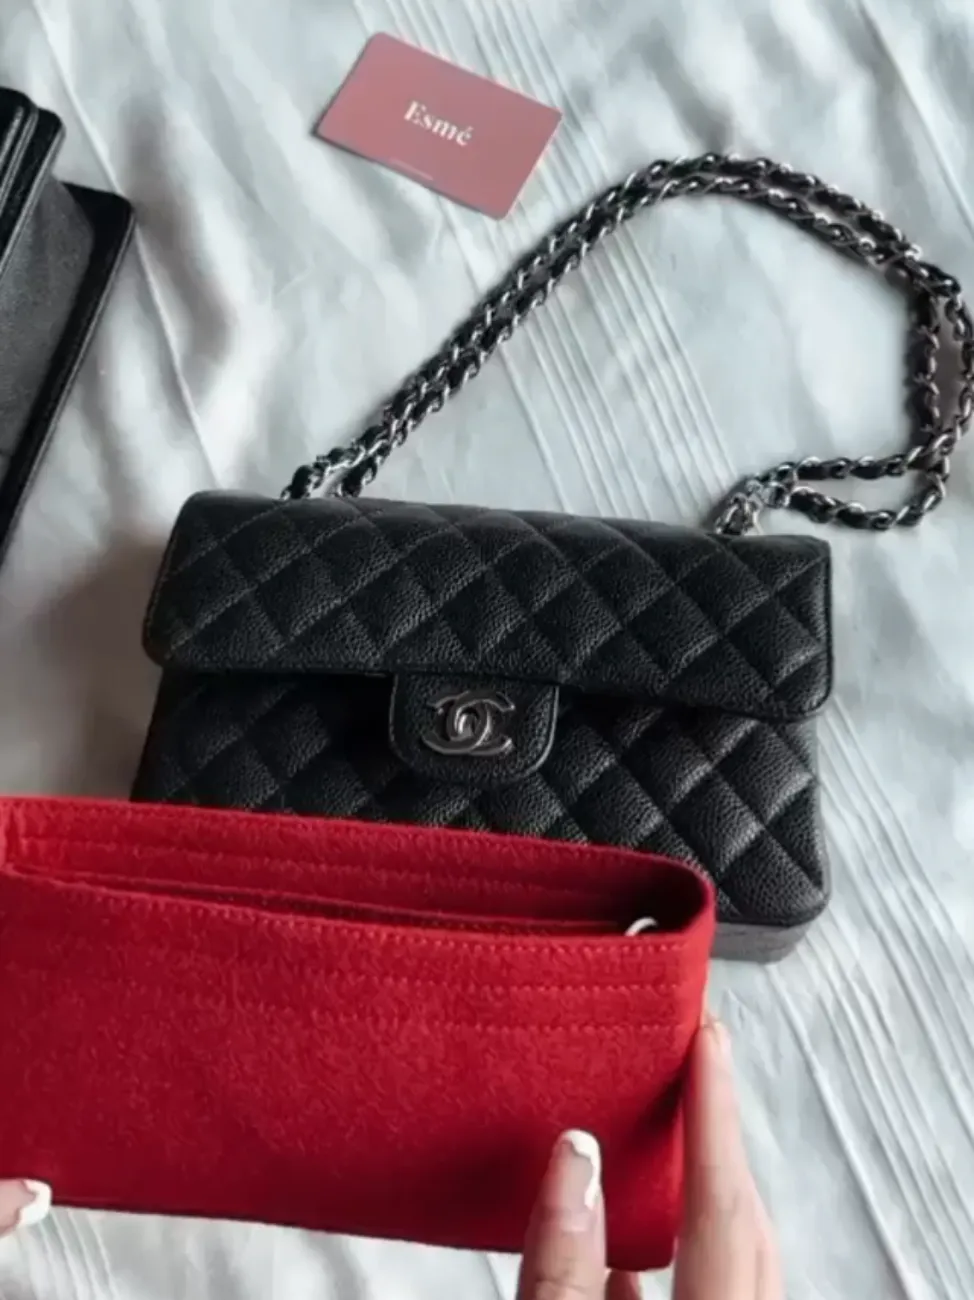 Chanel CF Small Bag Insert in Carmine Red., Video published by Esmé®  Singapore